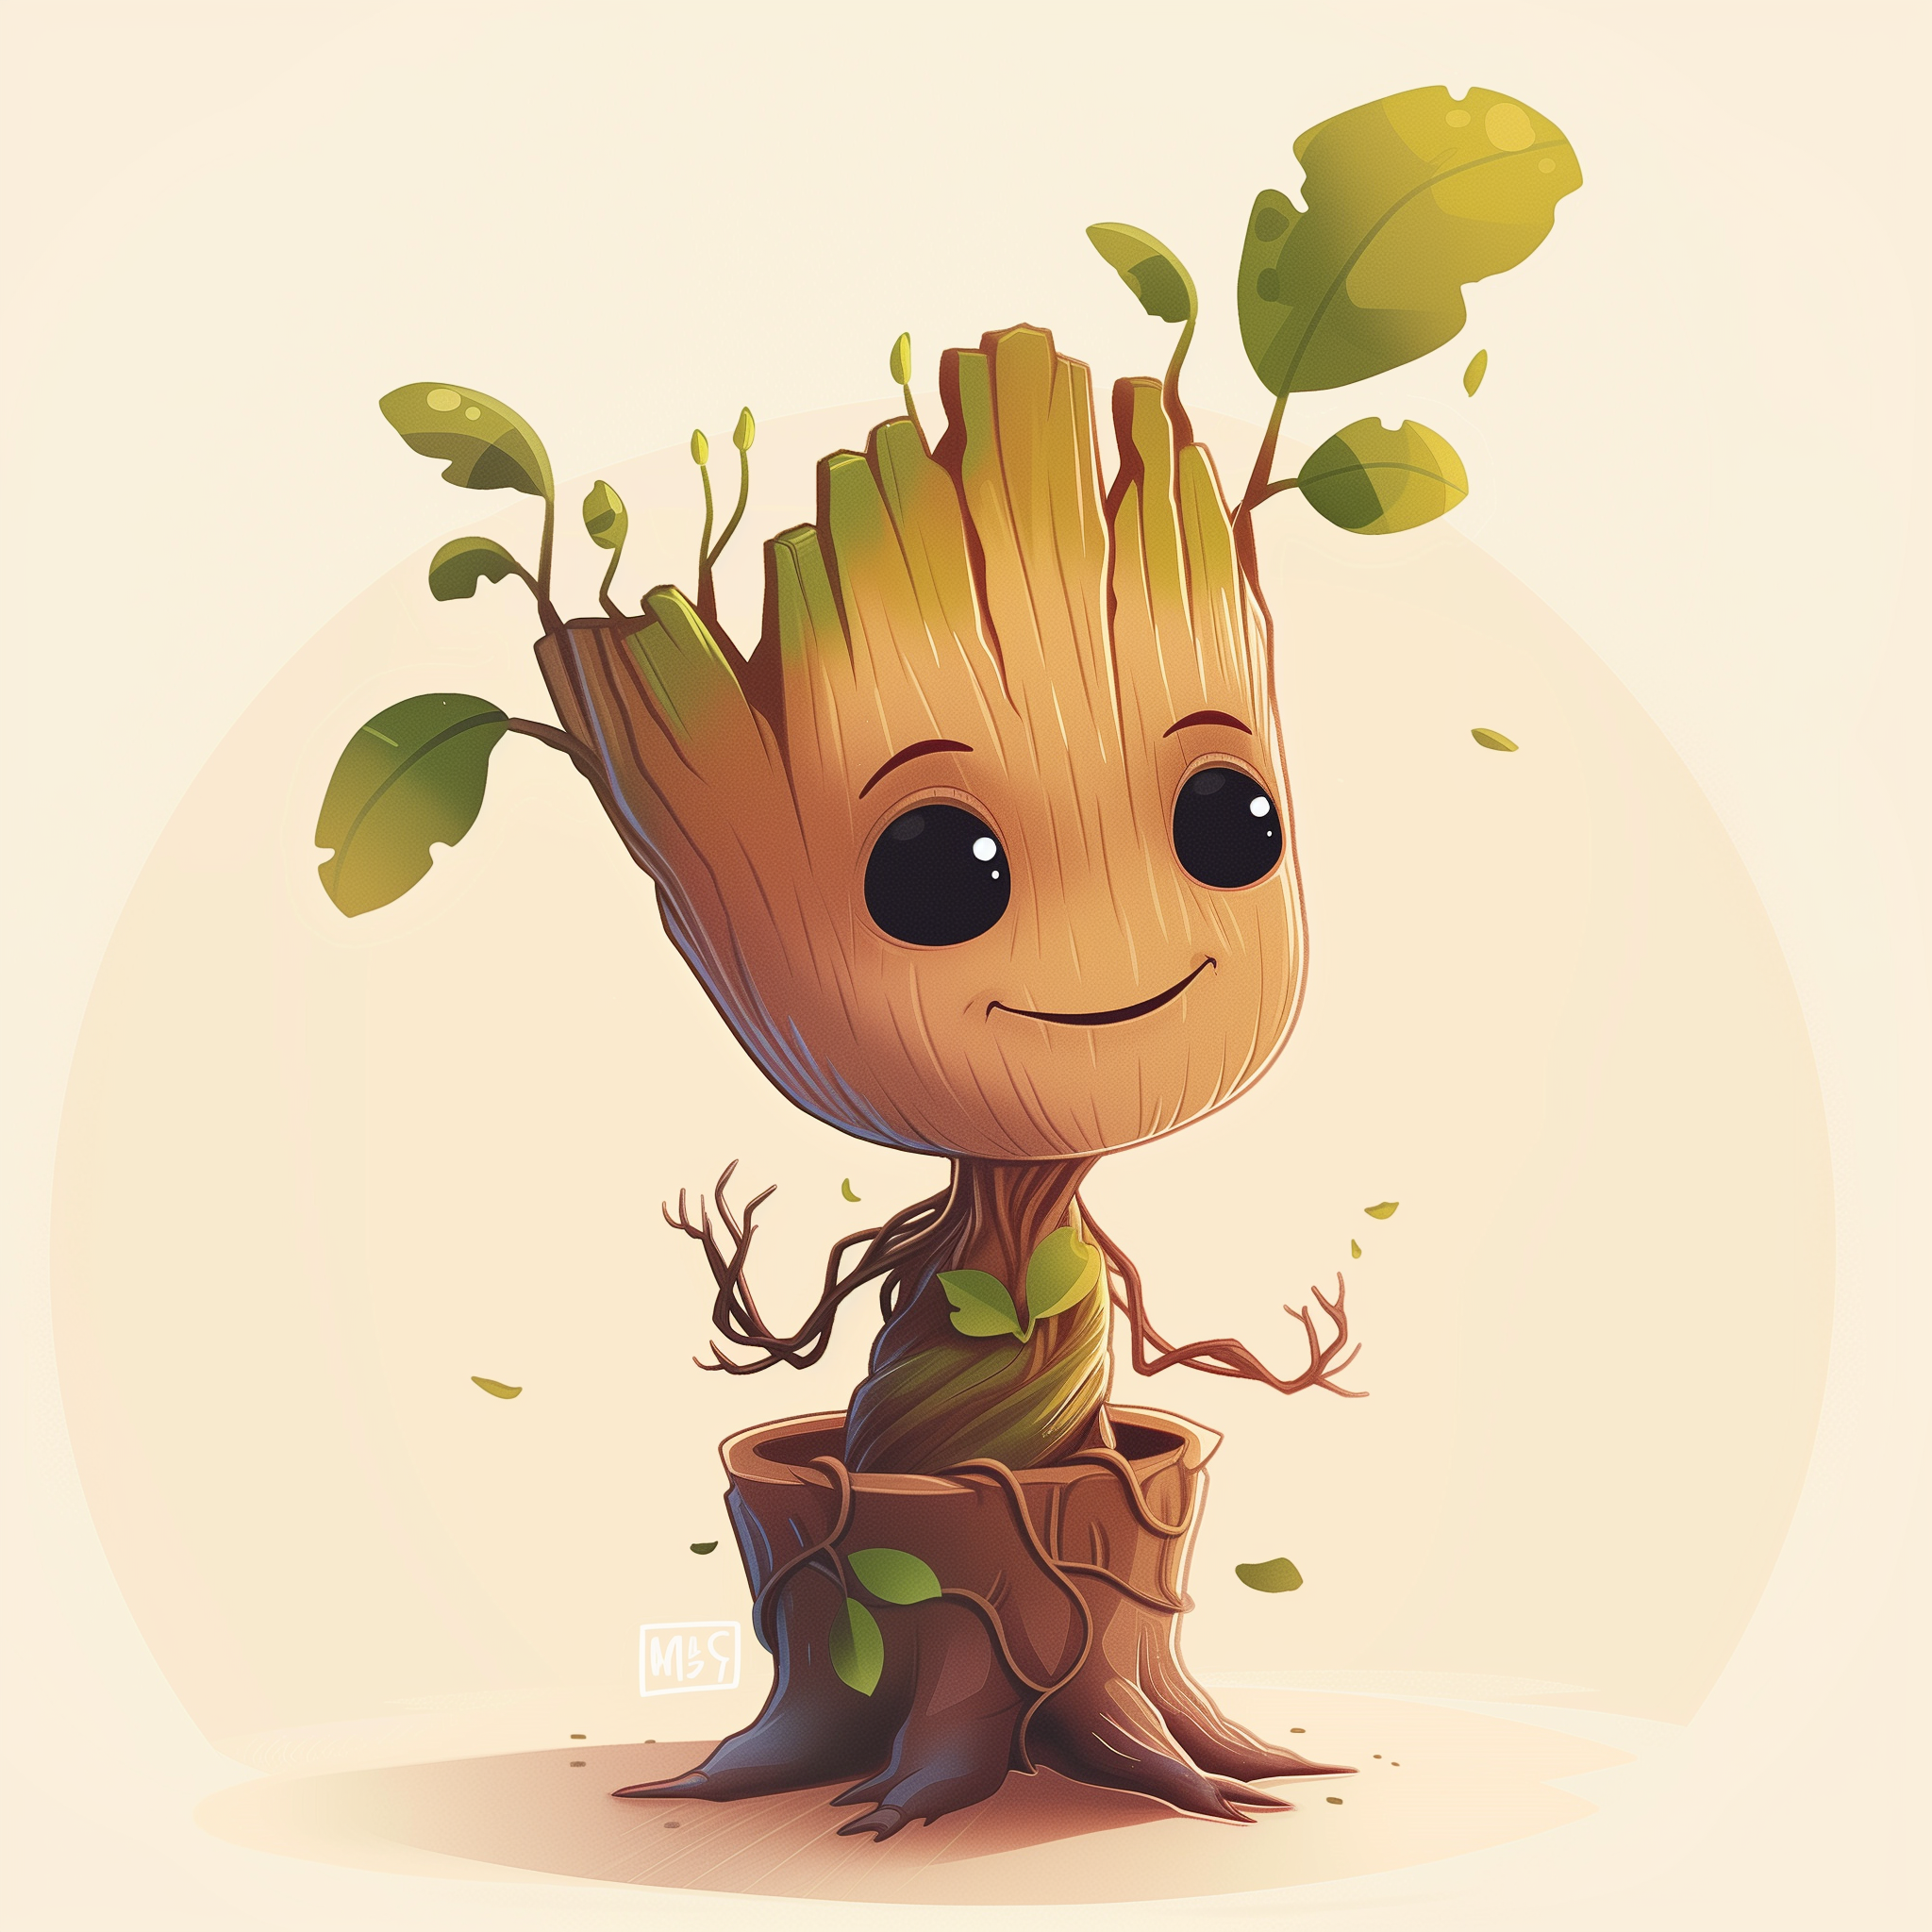 Cute animated avatar of Baby Groot from Marvel Comics, standing with a friendly smile and leaves sprouting.